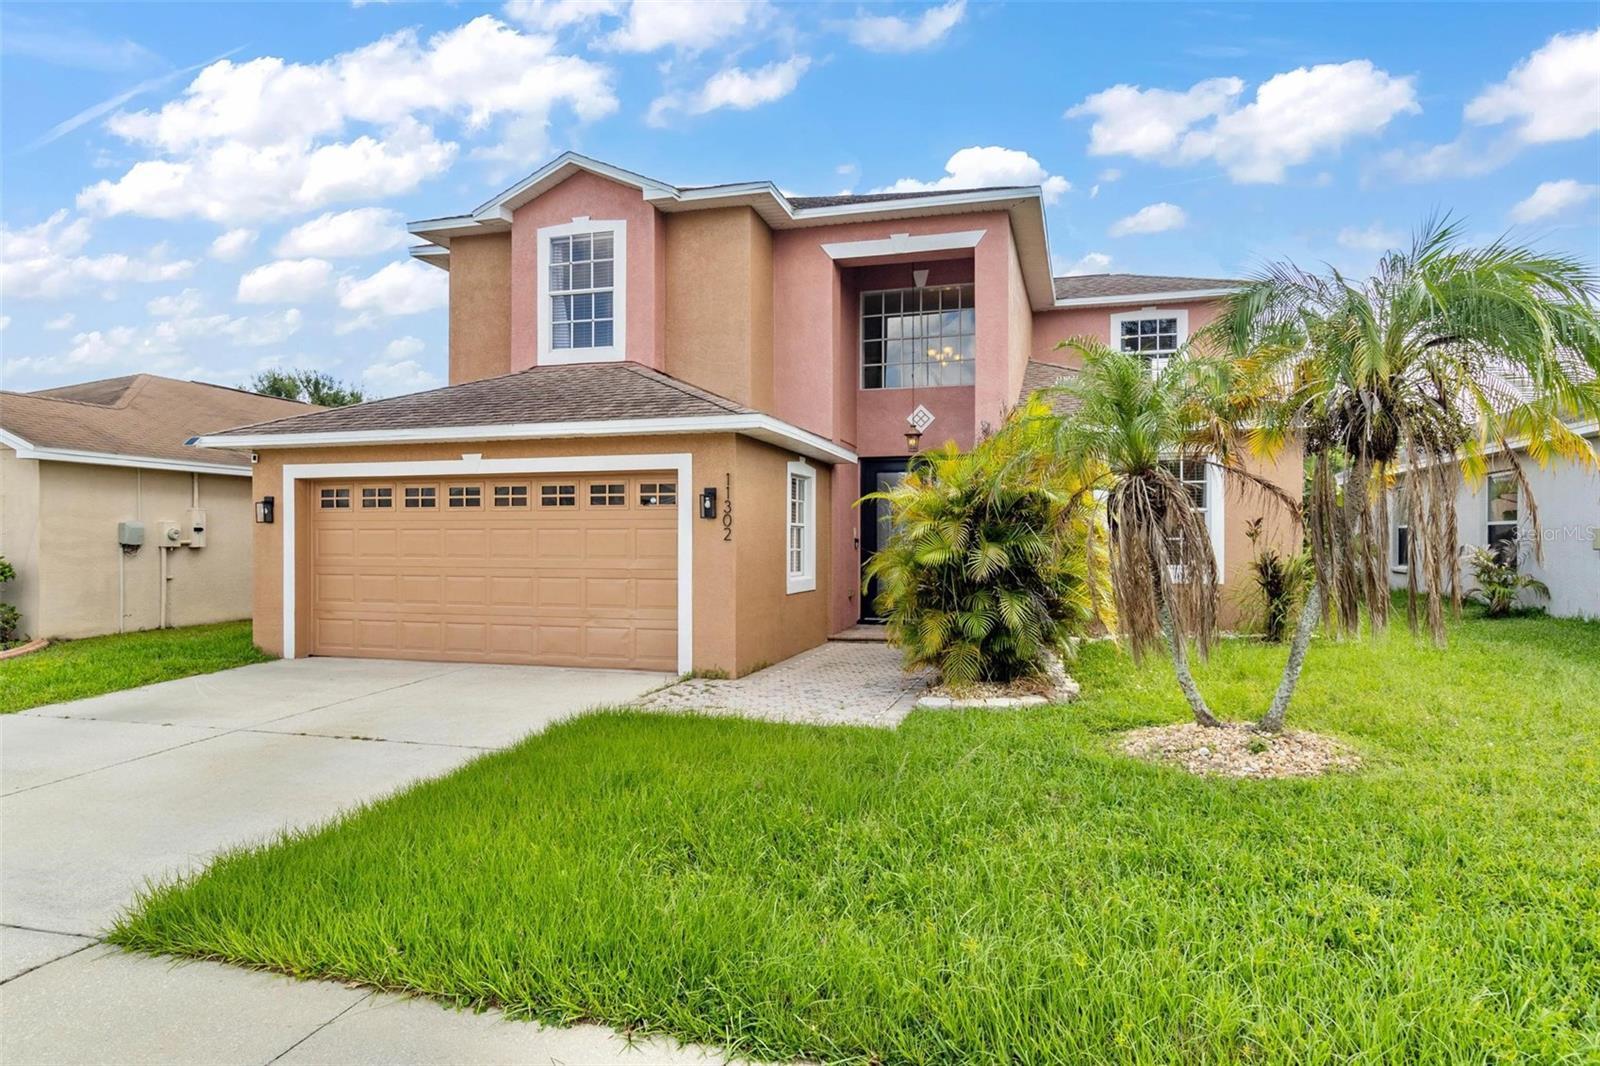 Photo one of 11302 Southwind Lake Dr Gibsonton FL 33534 | MLS T3470778